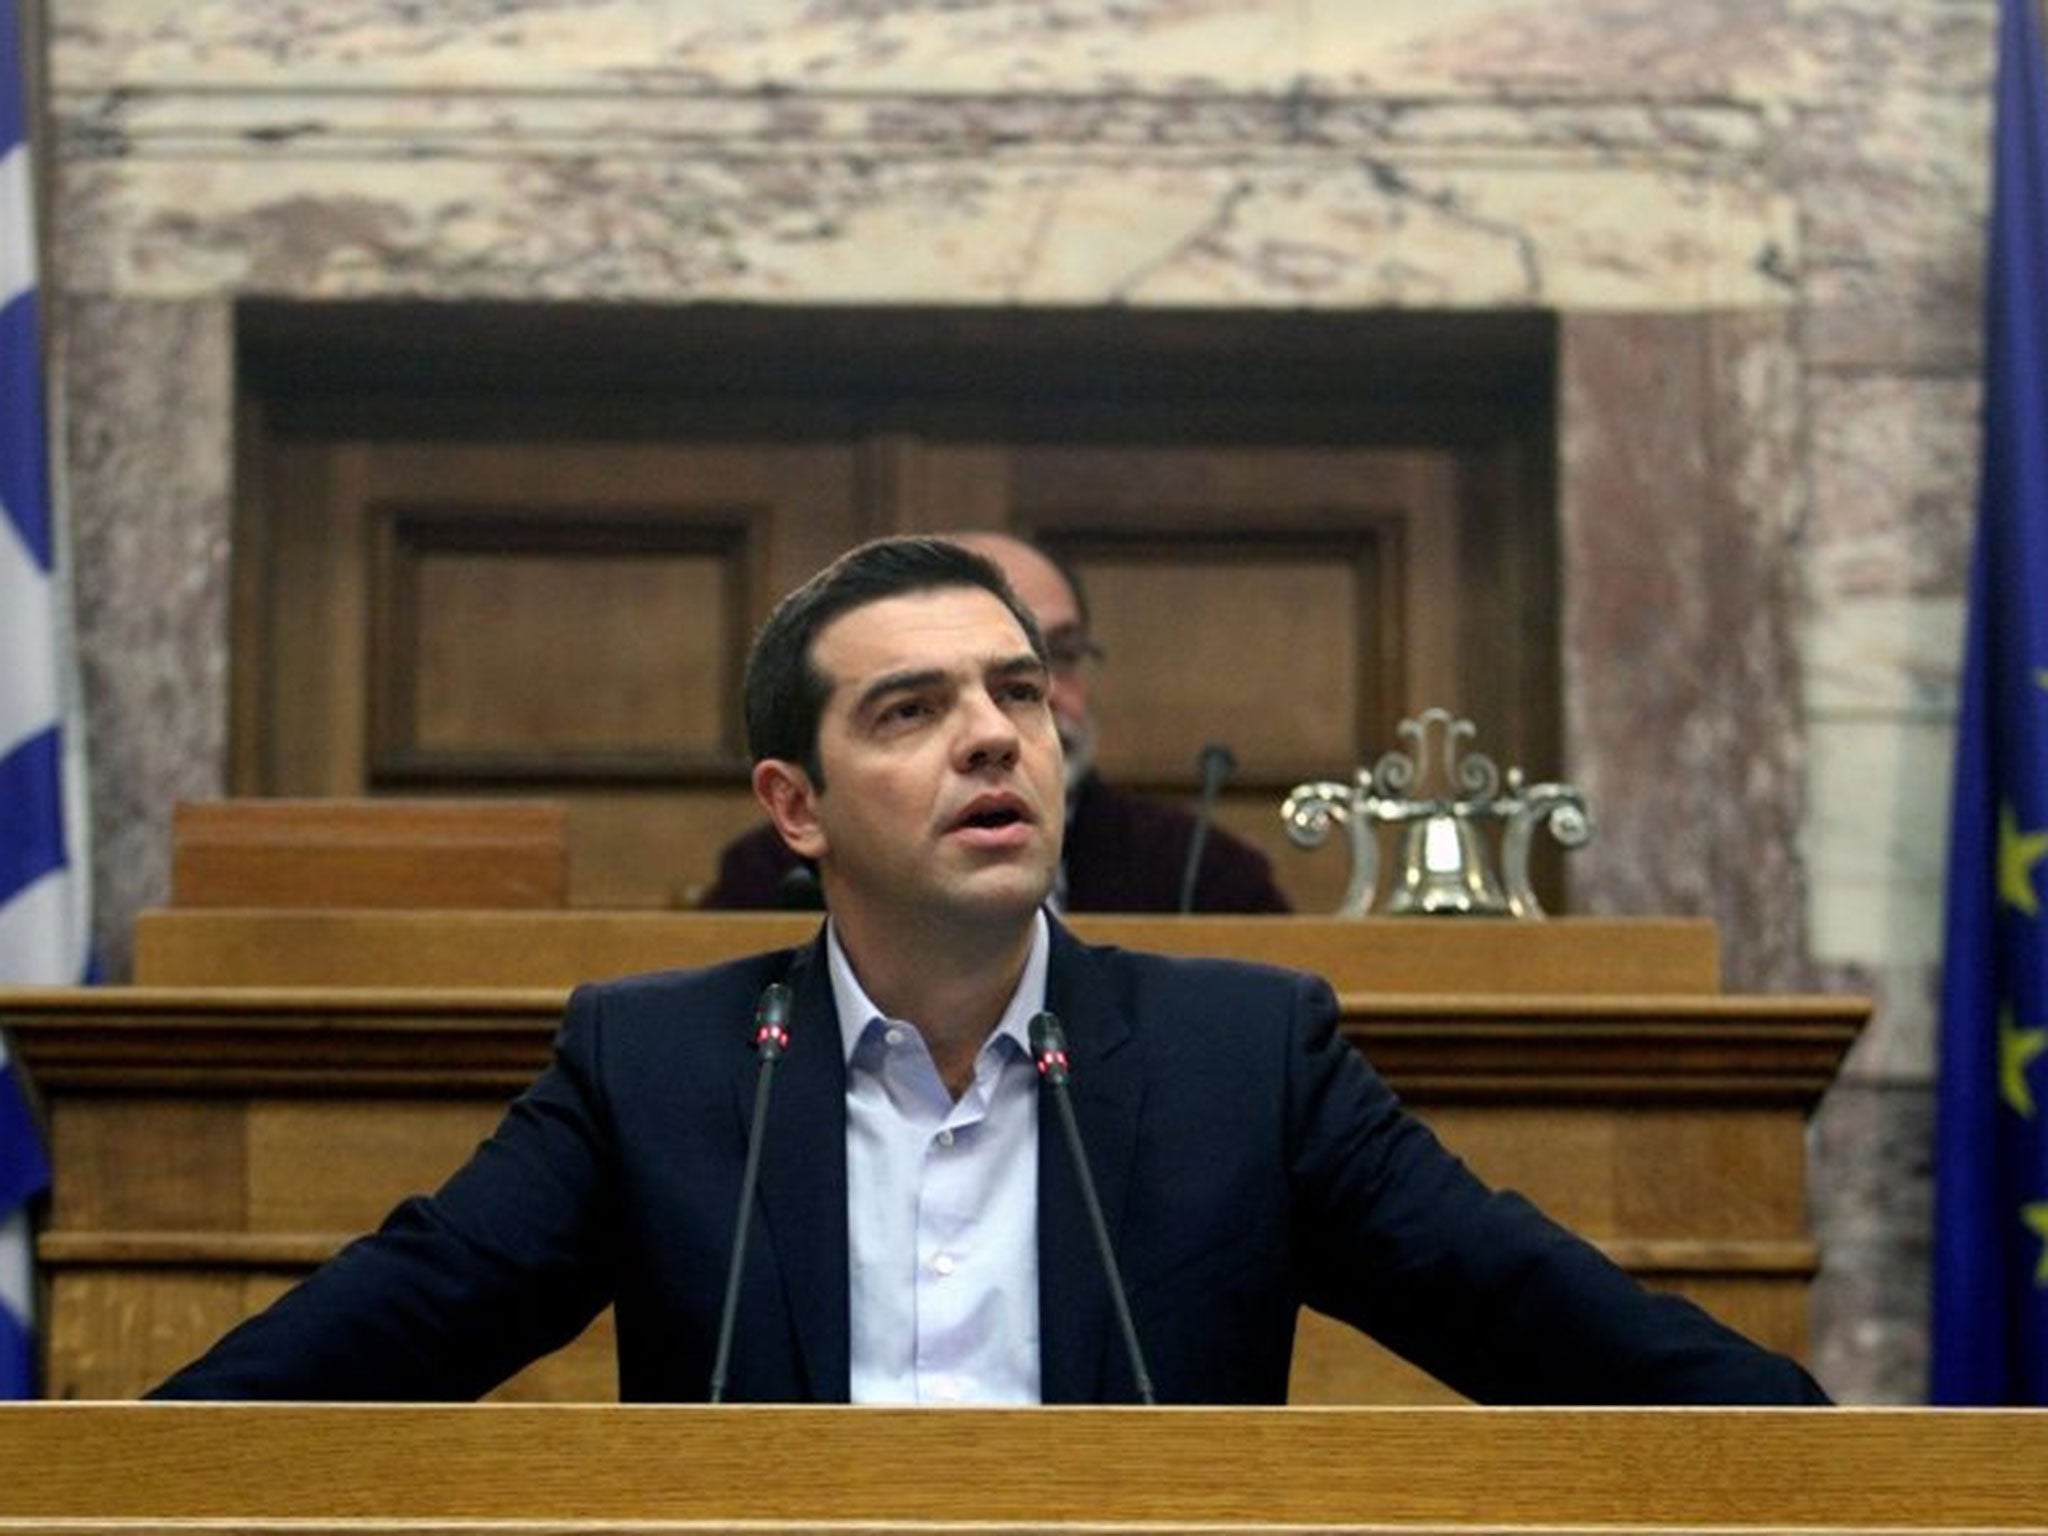 Greek Prime Minister Alexis Tsipras addresses his party lawmakers during a meeting of their parliamentary group at the Parliament in Athens, Greece